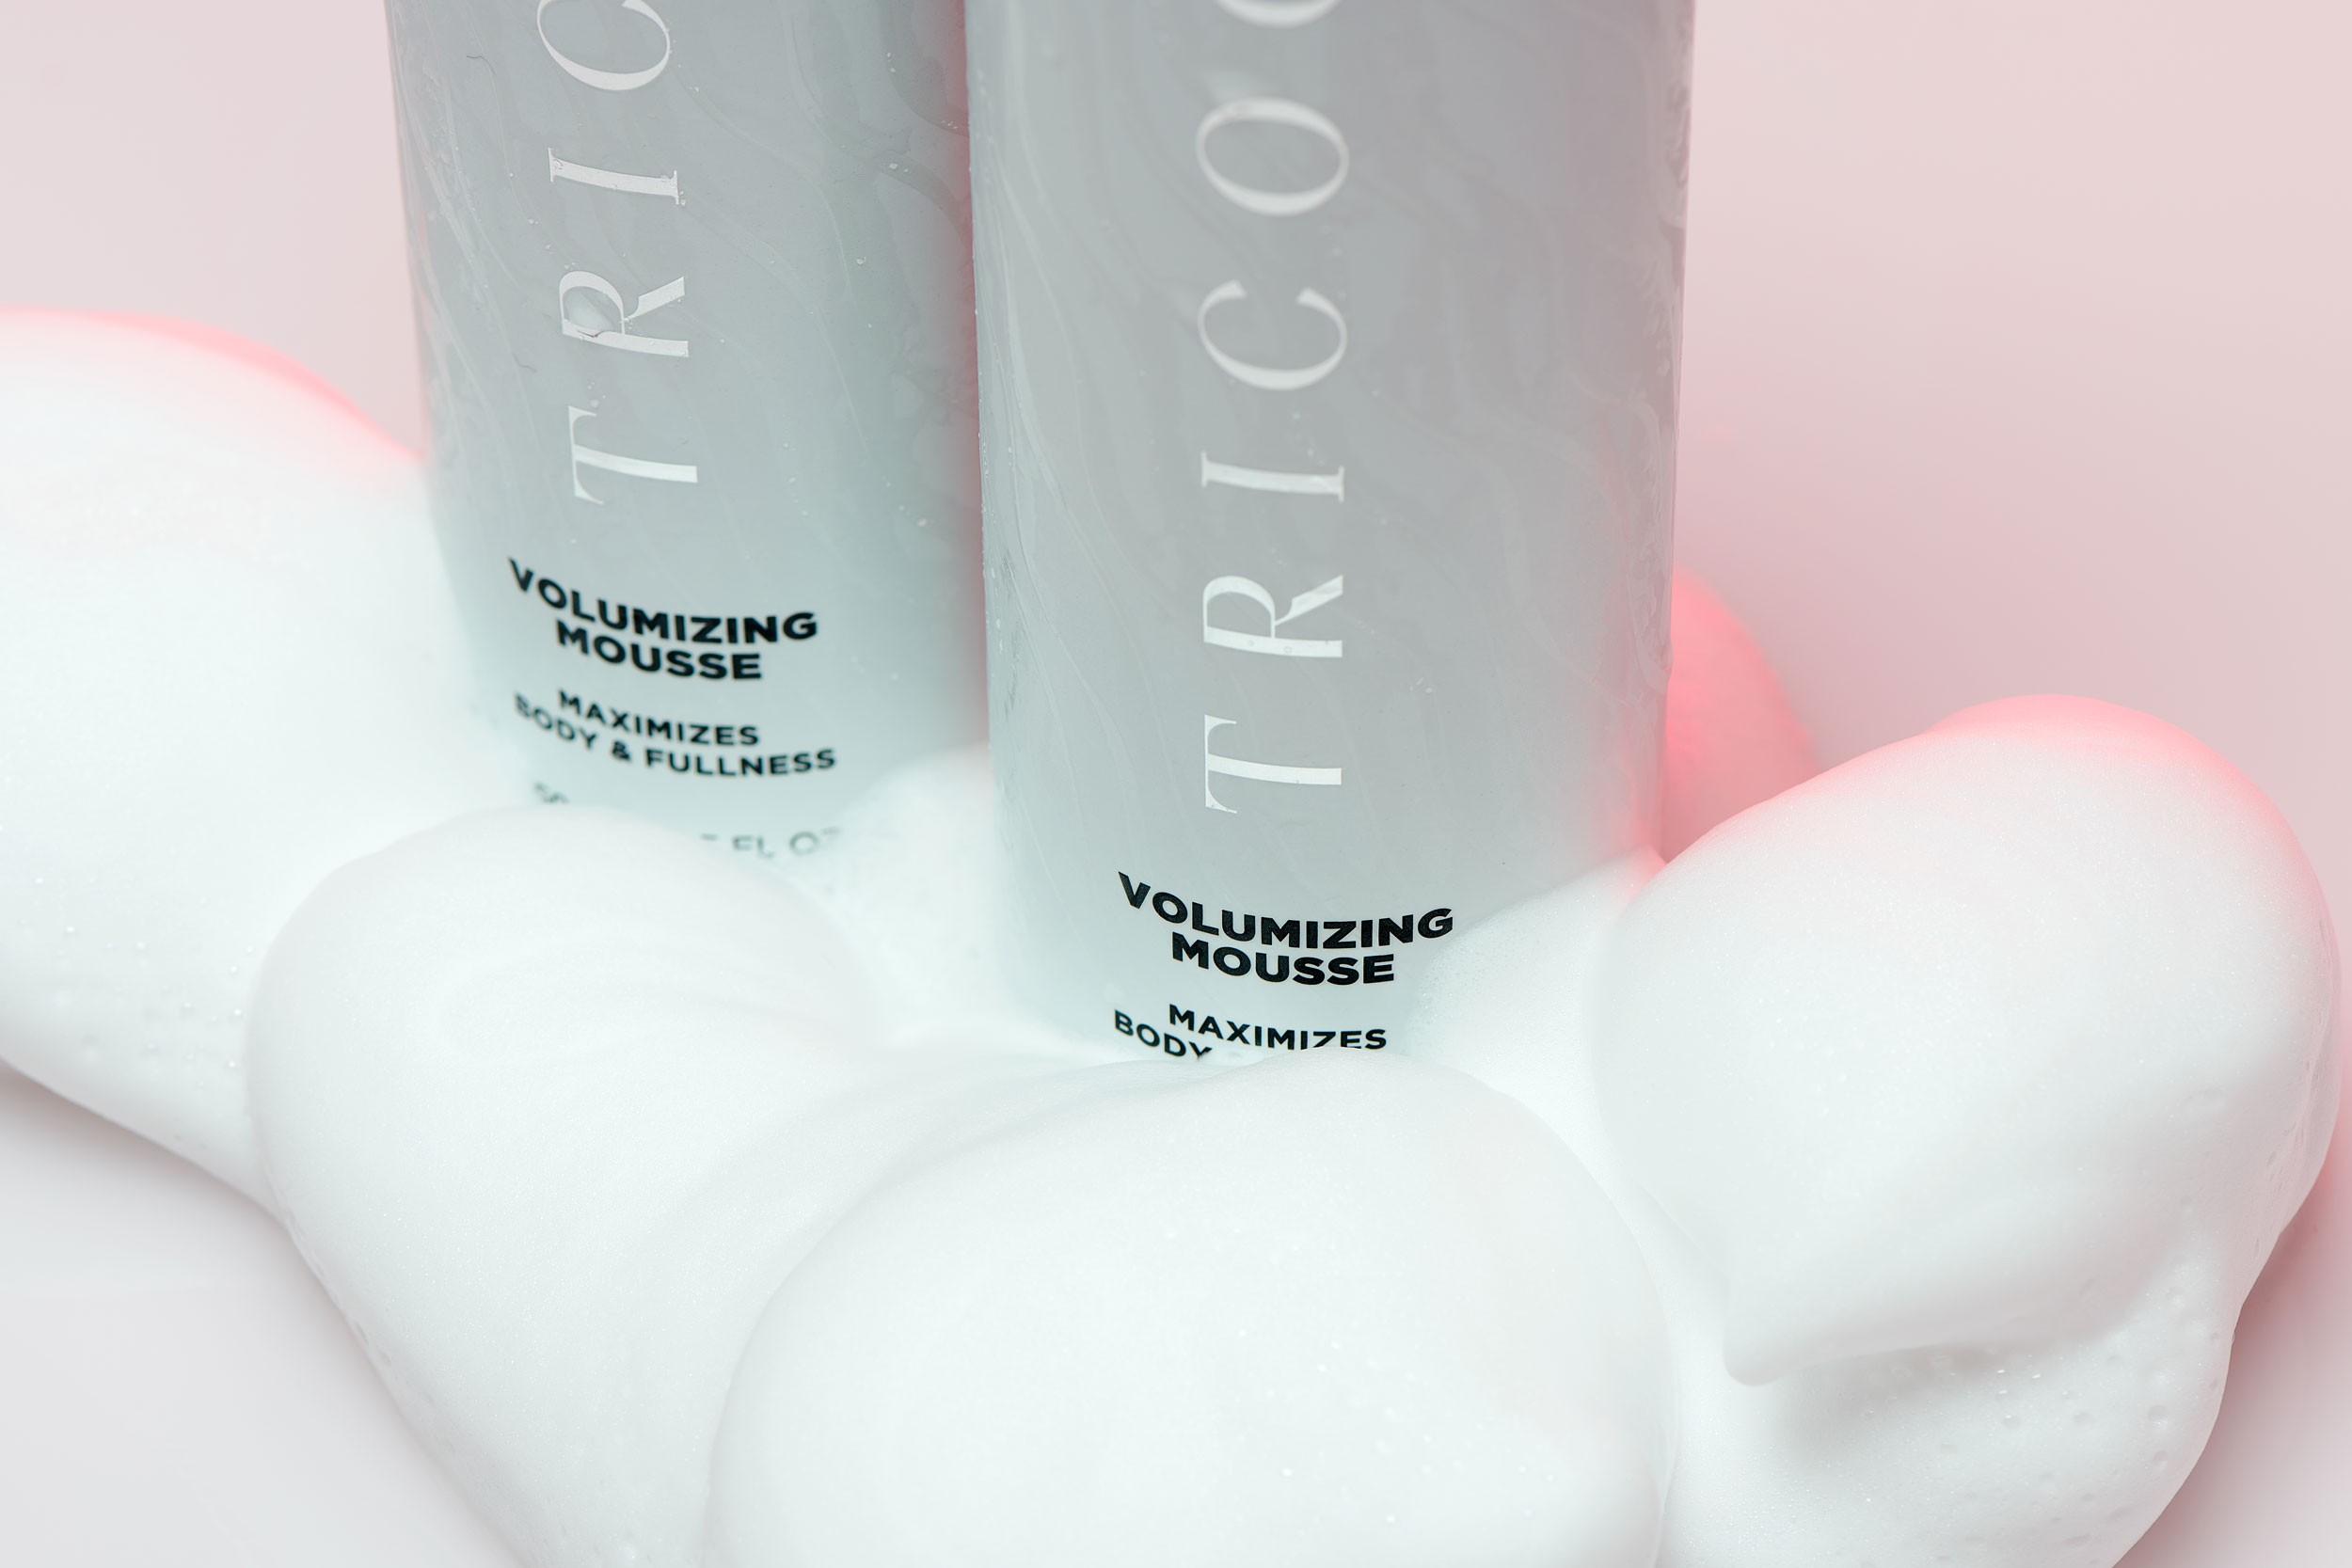 Detail image of two haircare products nestled in mousse